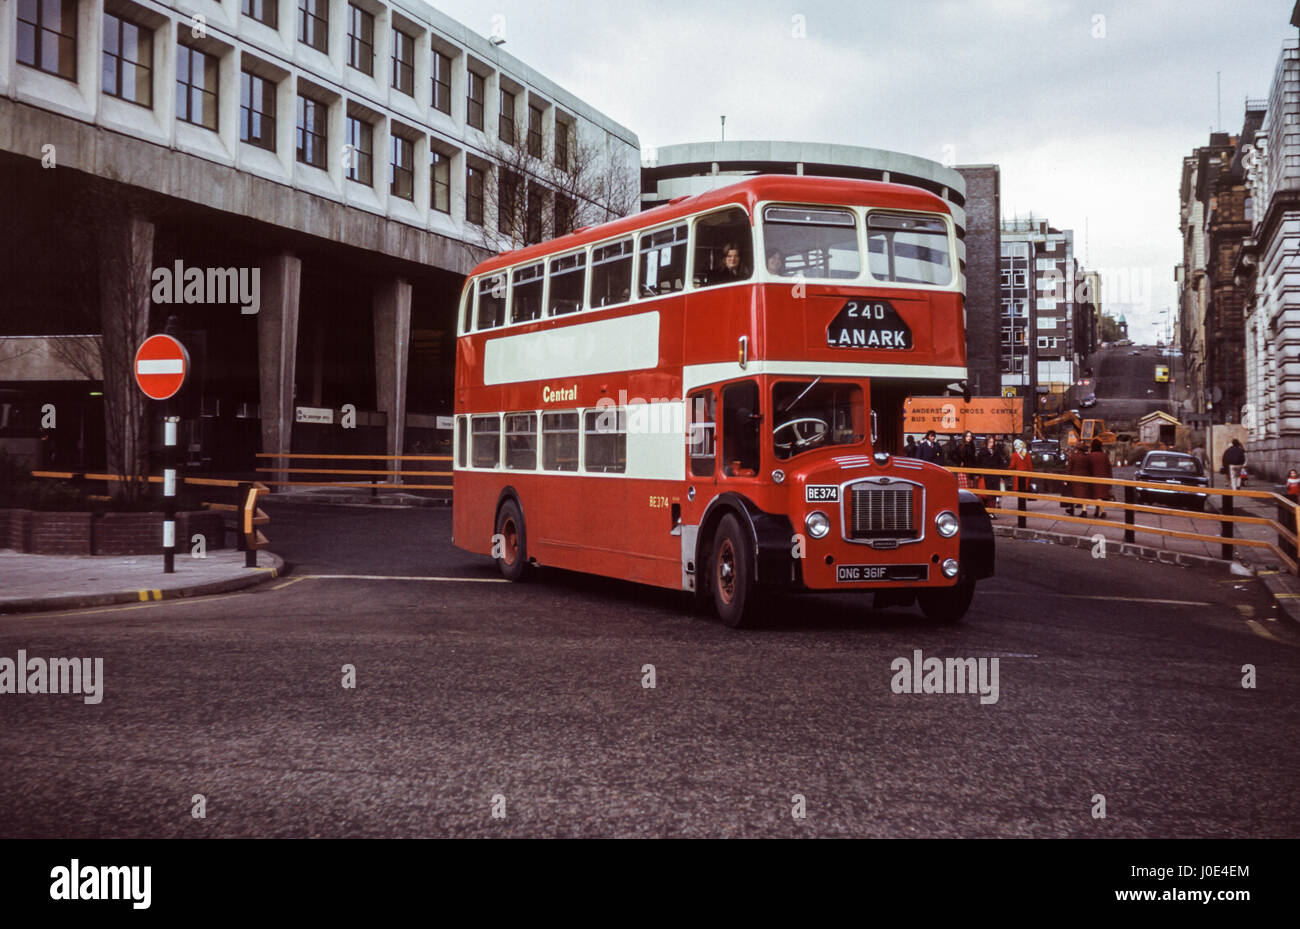 Scotland, UK - 1973: Vintage image of bus in central Glasgow.   Central SMT ex Eastern Counties Bristol Lodekka FLF6G/ECW BE374 (registration number ONG 361F) Stock Photo